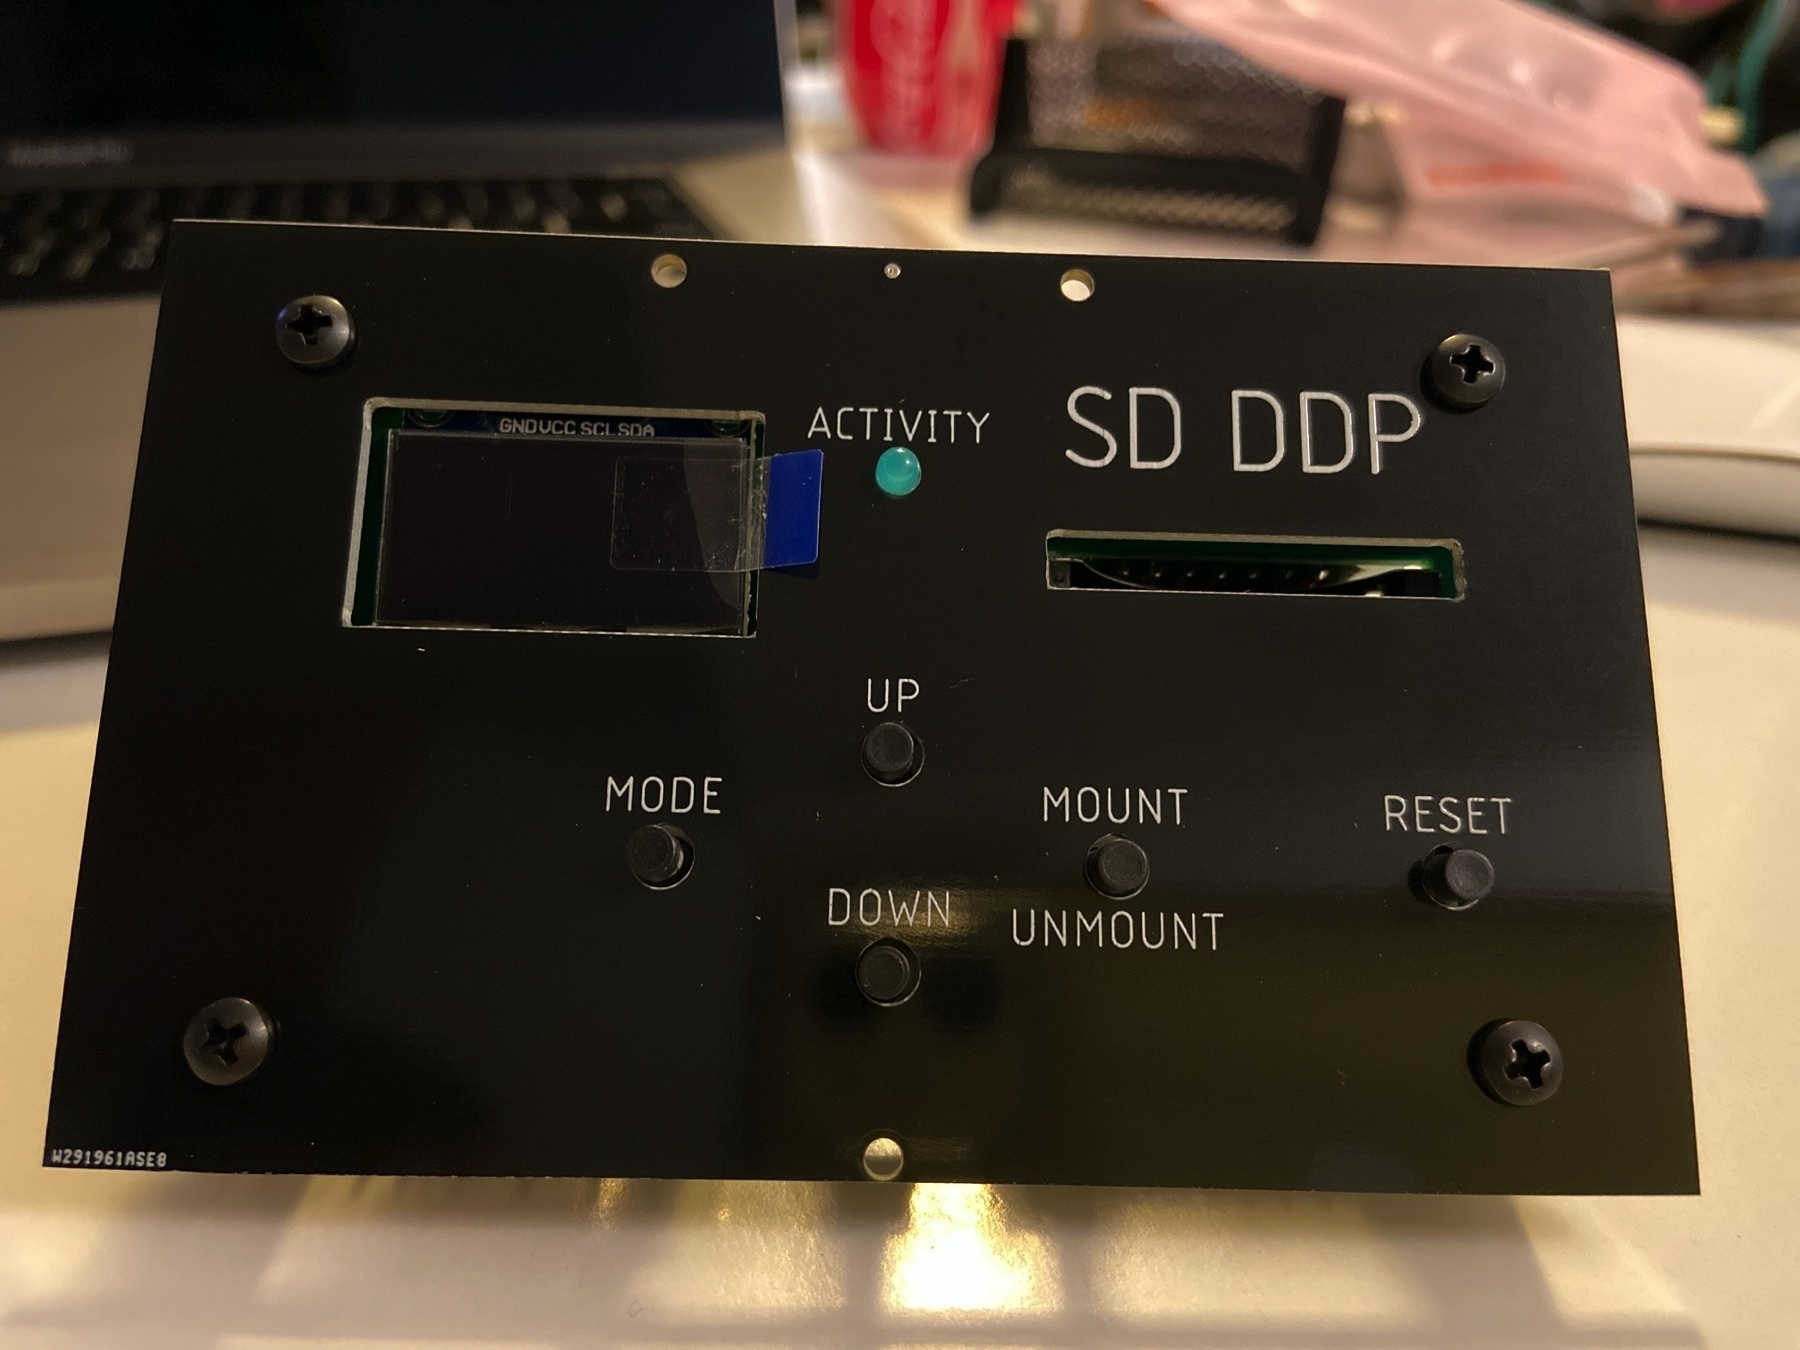 The ADAM SD-DDP prior to installation.